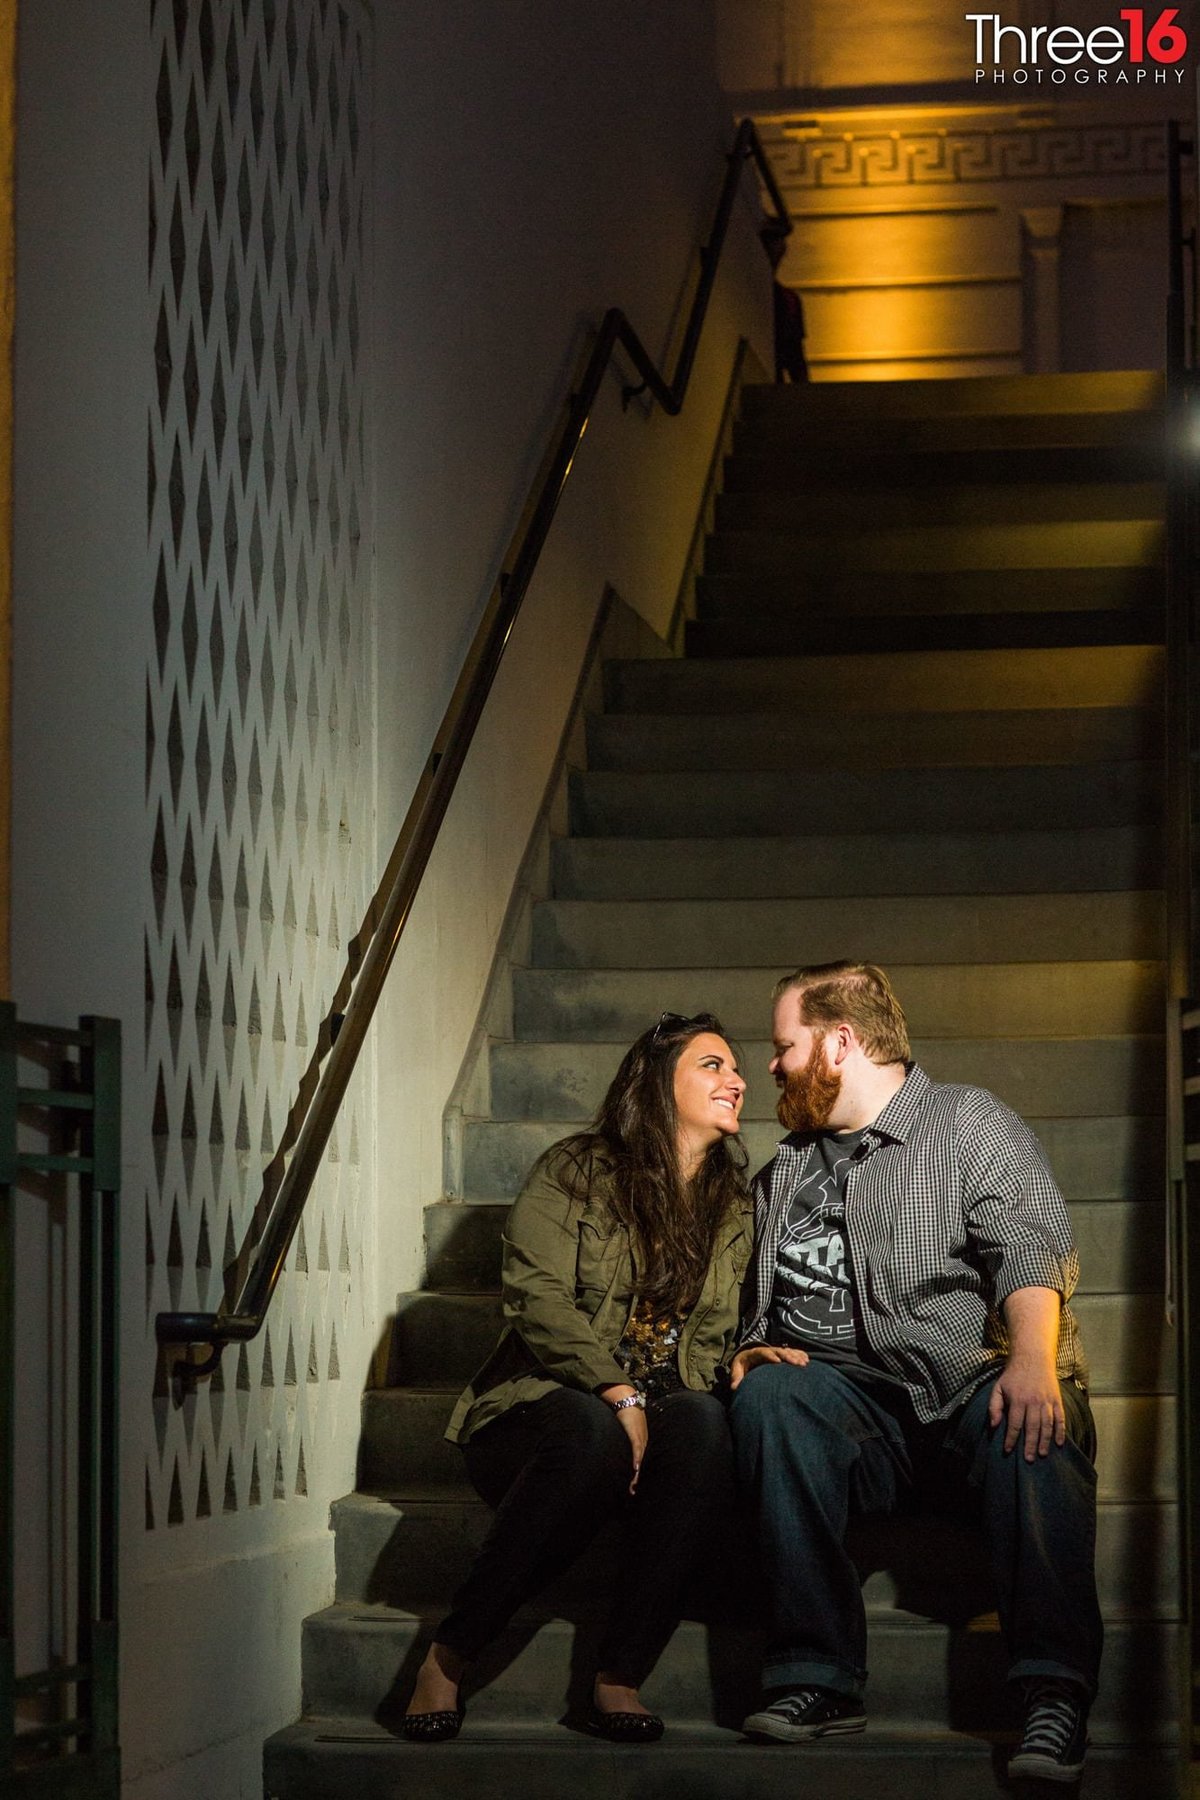 Engaged couple have big smiles as they sit on the stairs